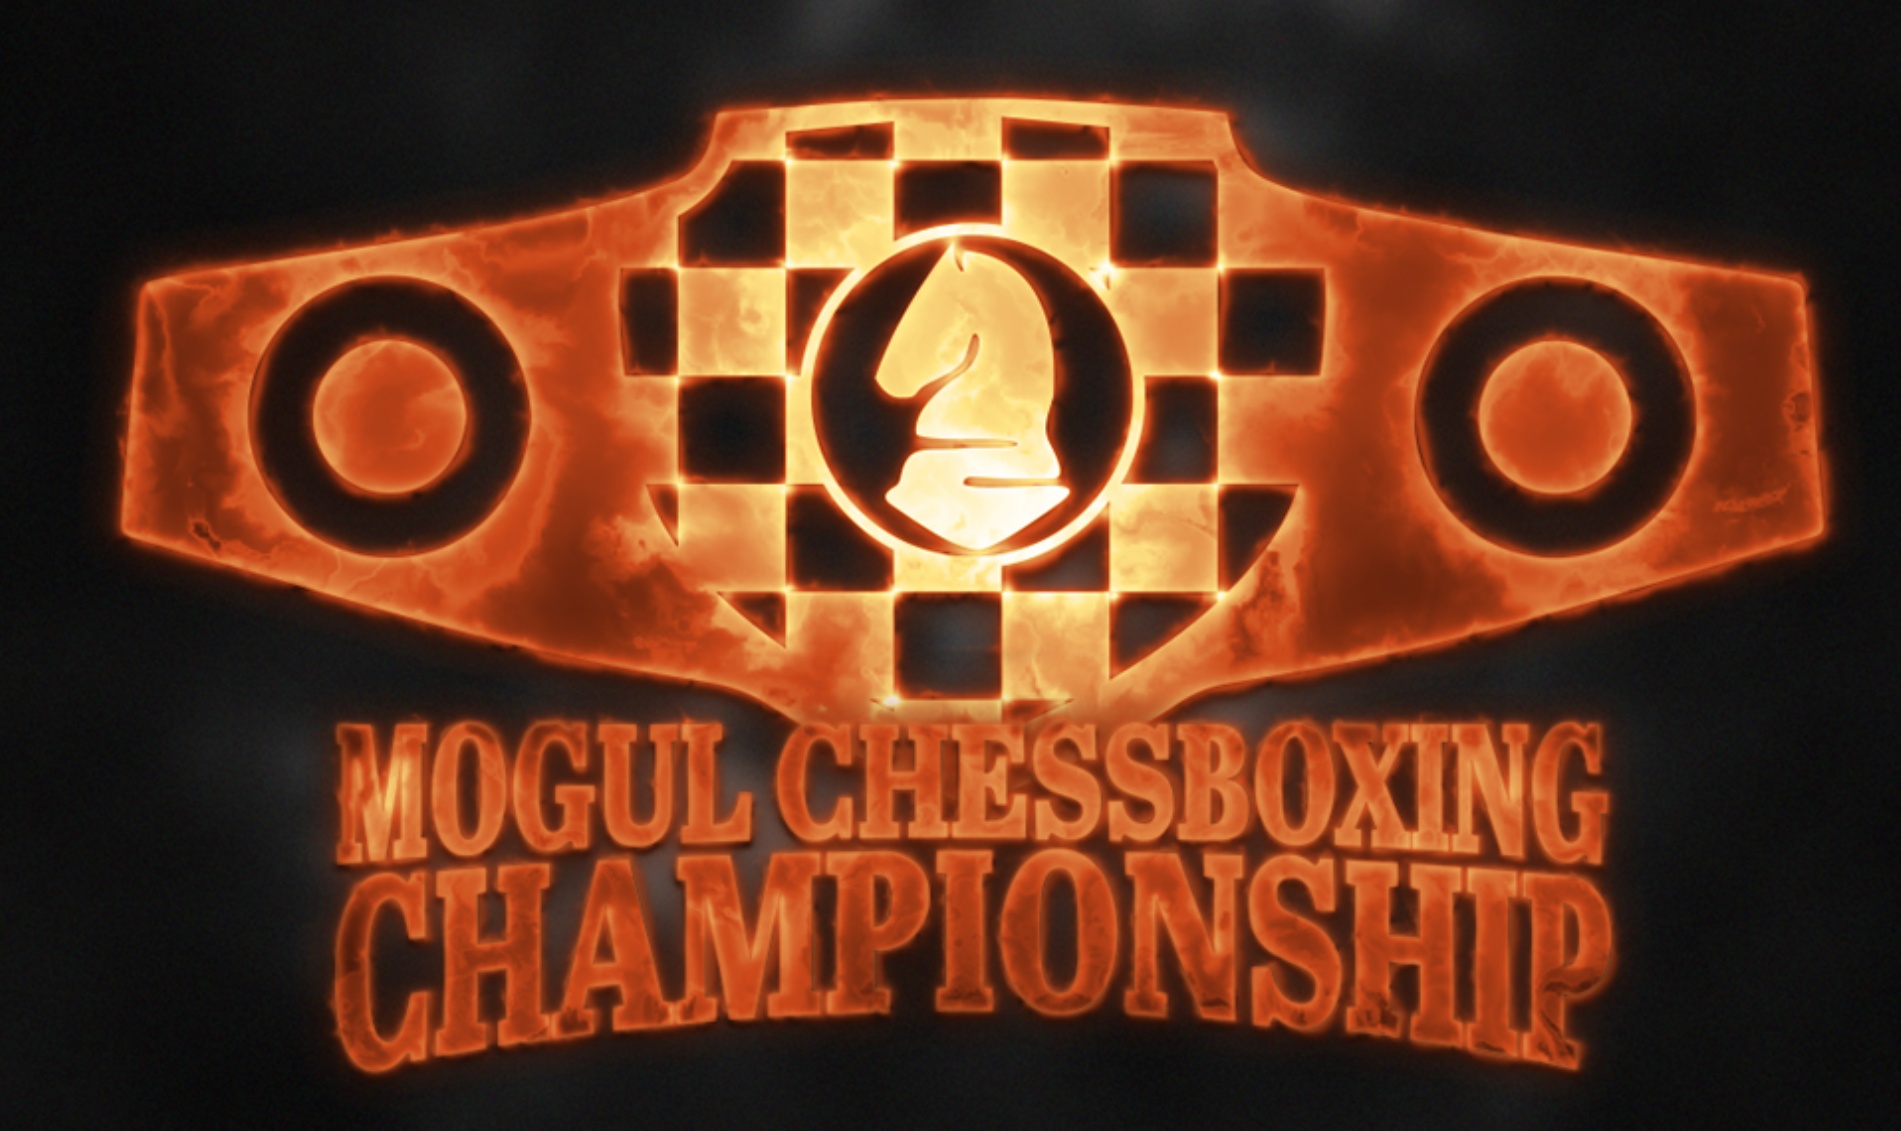 Mogul Chess Boxing Championship presented by Ludwig (4PM PT Dec 11)